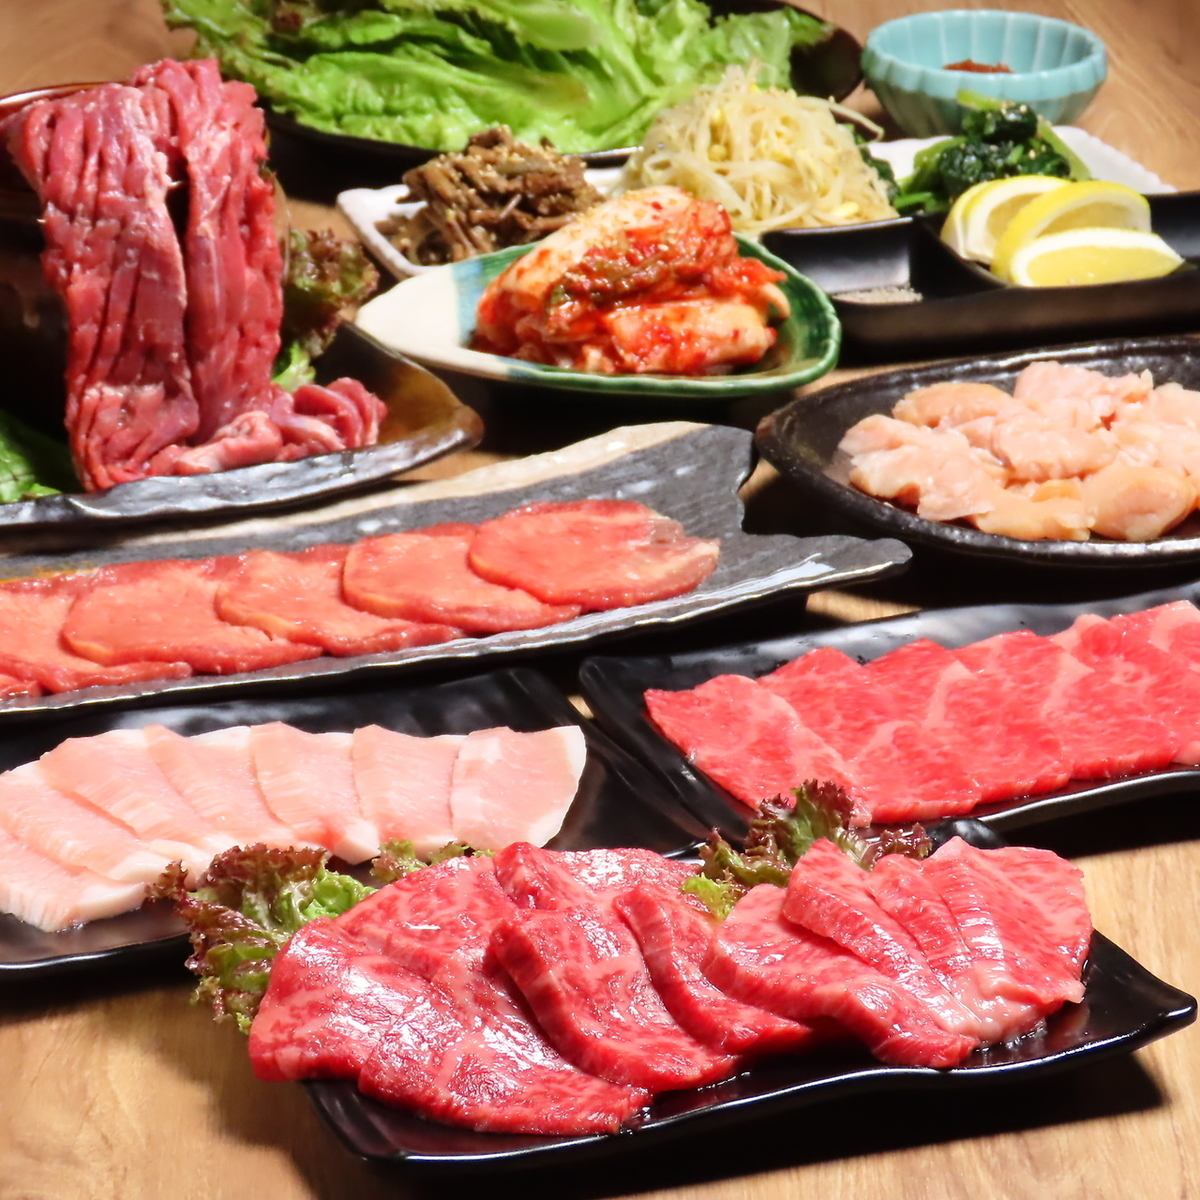 All-you-can-drink starts from 748 yen (including tax)! Let's have a great time with cheap and delicious yakiniku and sake!